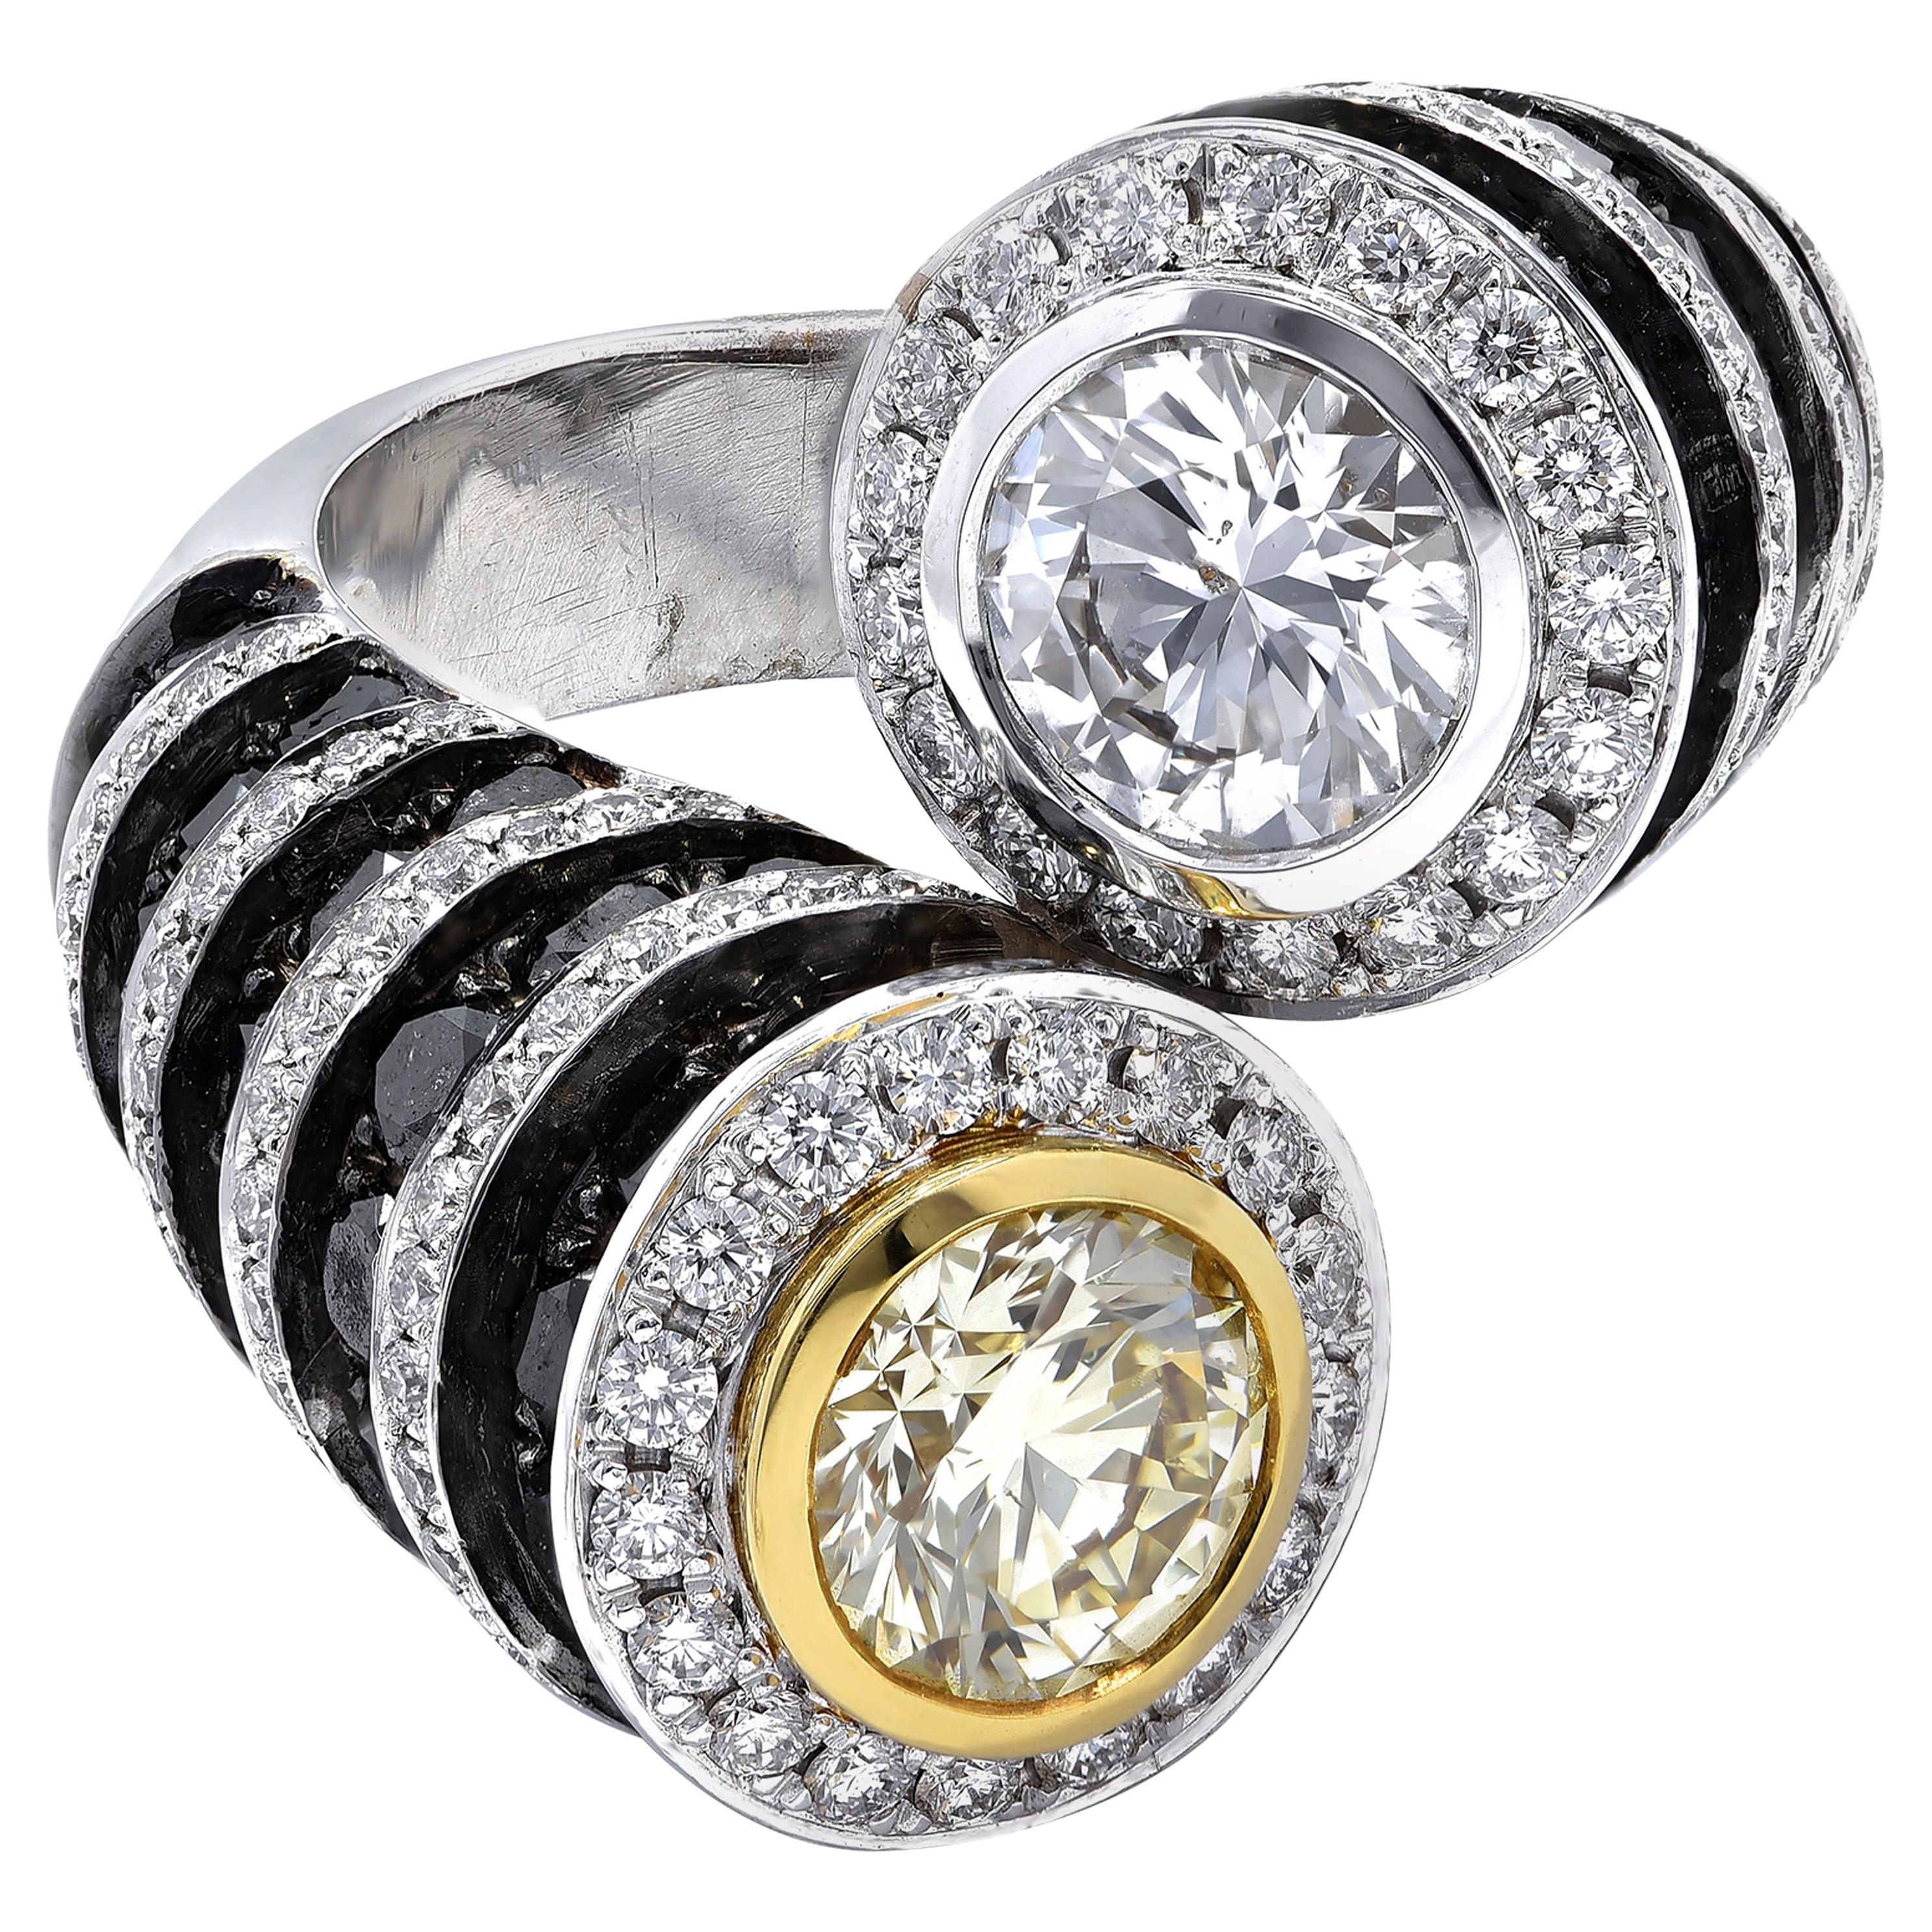 18kt White Gold Toi & Moi Diamond Ring 1.14ct and 1.28ct

Ring in white gold with 2 solitaire diamonds.

Diamonds: 1.14 ct Fsi SI2 F - 1.28 ct Fancy Light Yellow lY-VS2 + 6.84cT 222° (4.44+2.4)

Material: 18kt white gold

Total weight: 5.30 gram